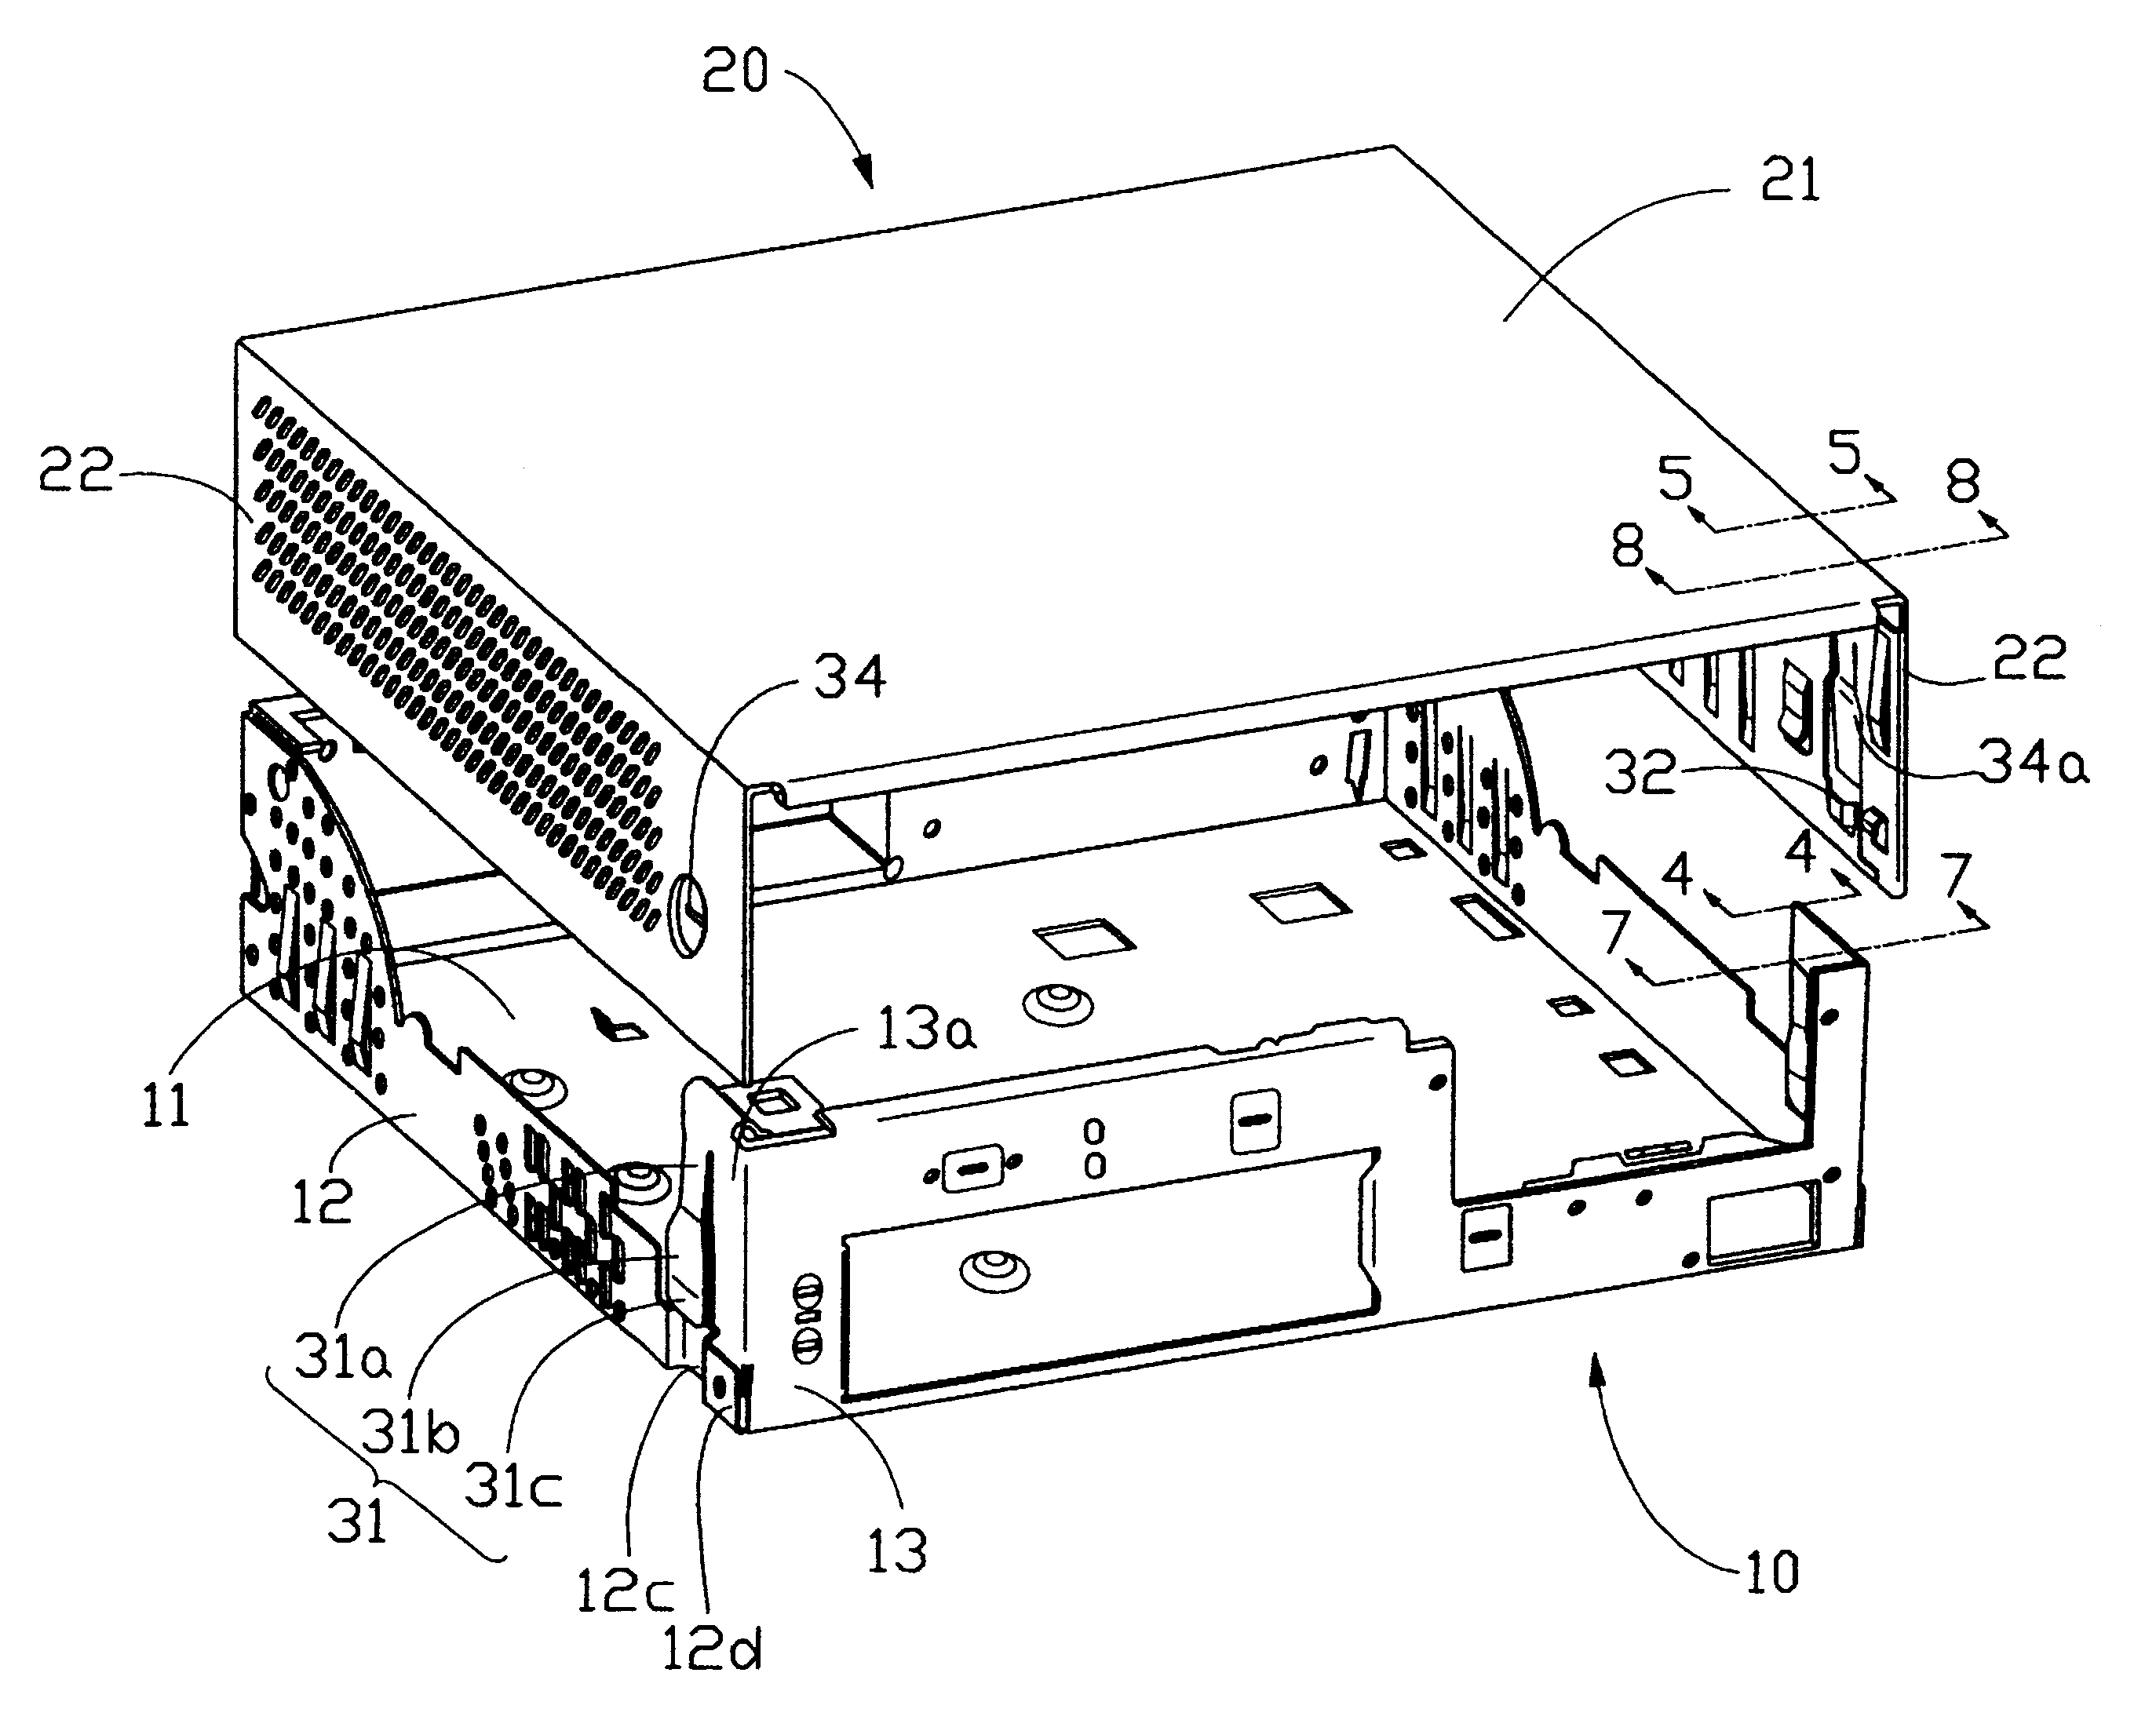 Computer enclosure with releasable interlocking mechanism between cover and chassis